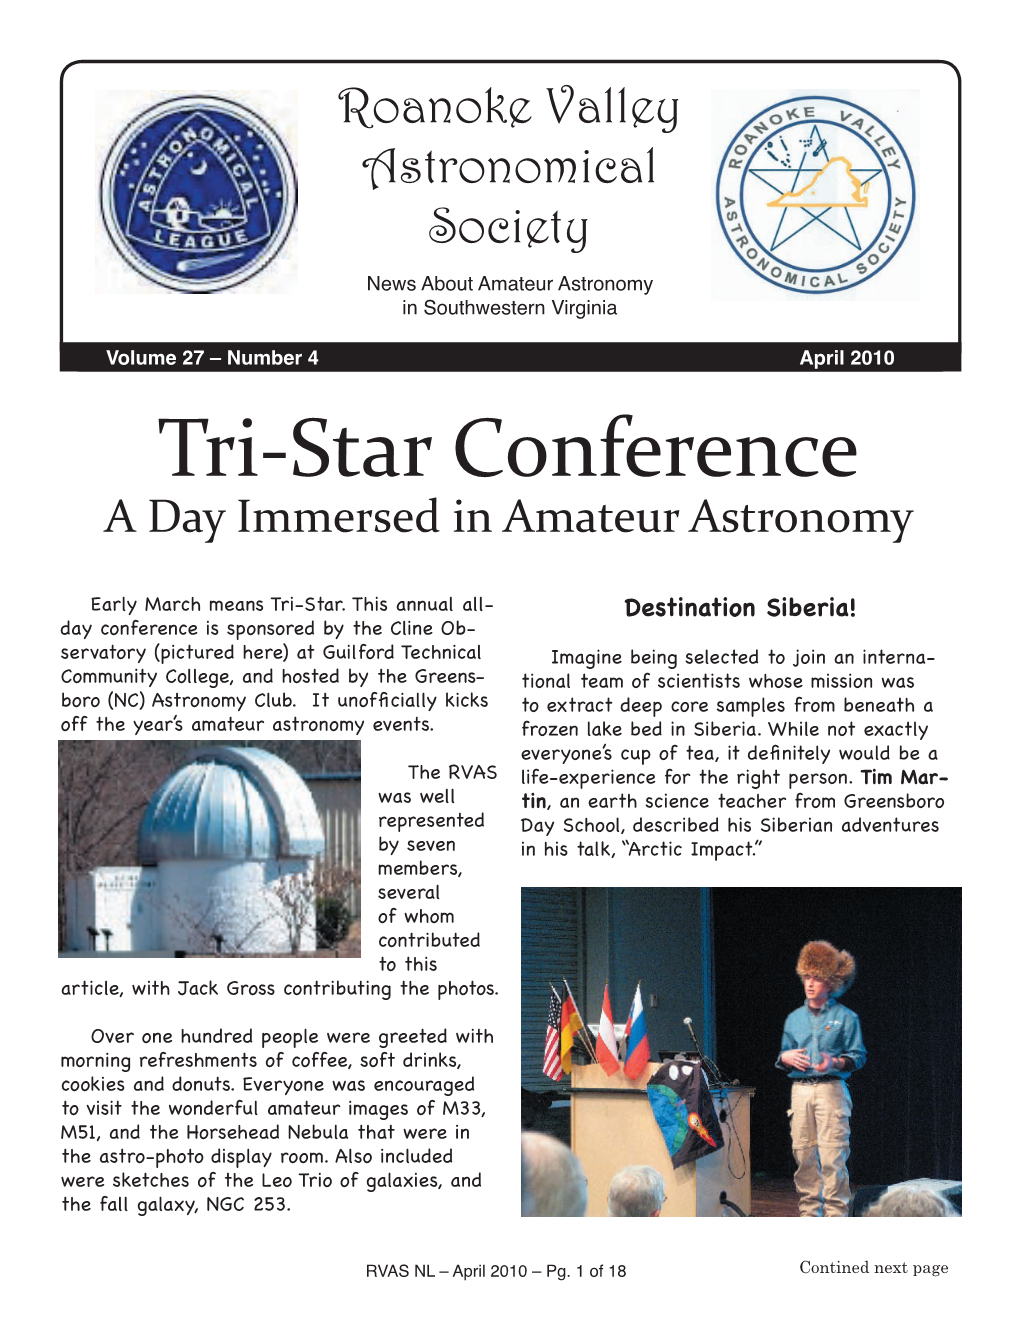 Tri-Star Conference a Day Immersed in Amateur Astronomy